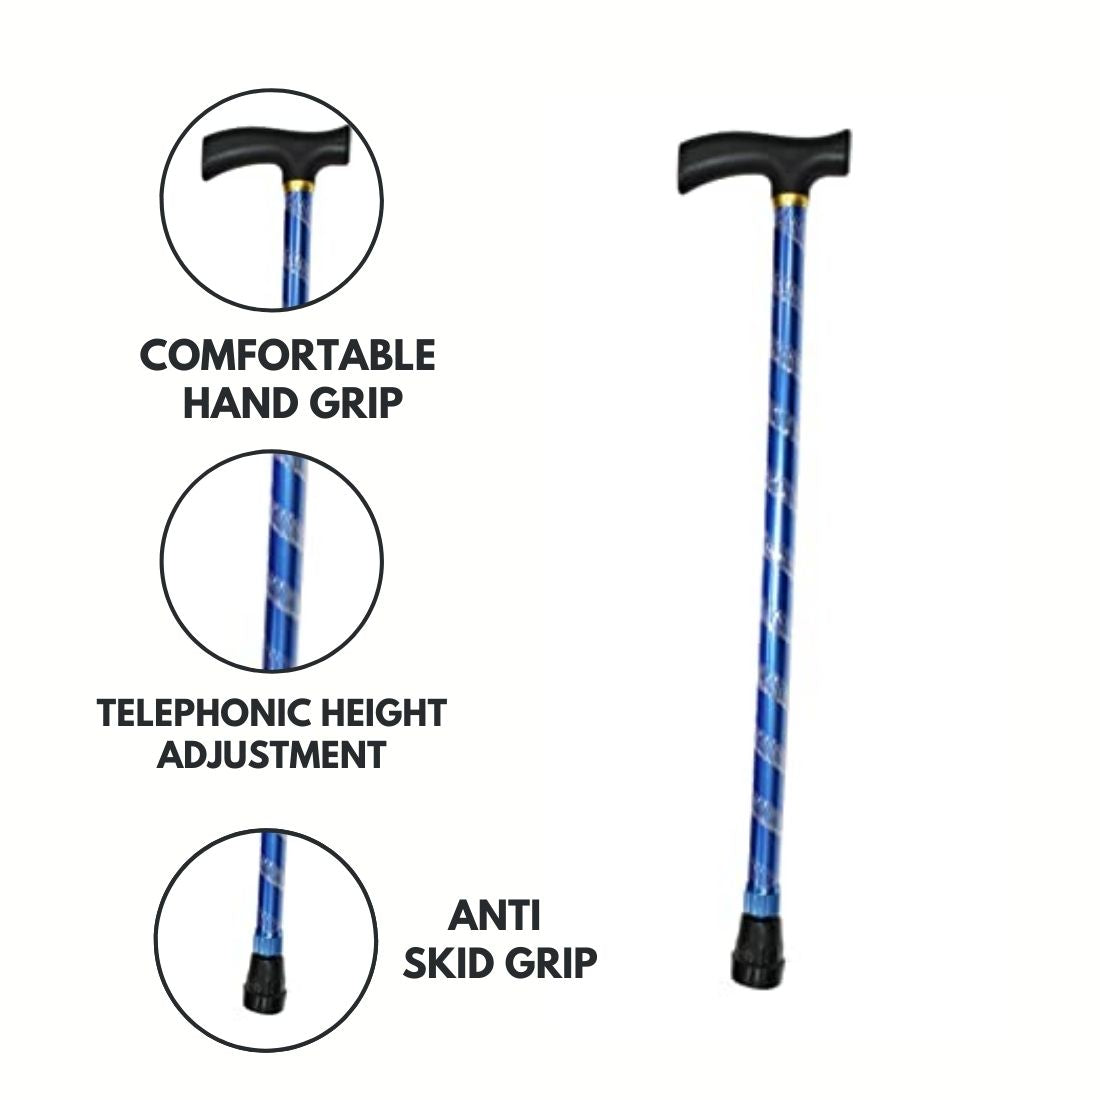 Buy Walking stick is well constructed and sturdy to be exceptionally safe, comfortable, durable and fashionable.